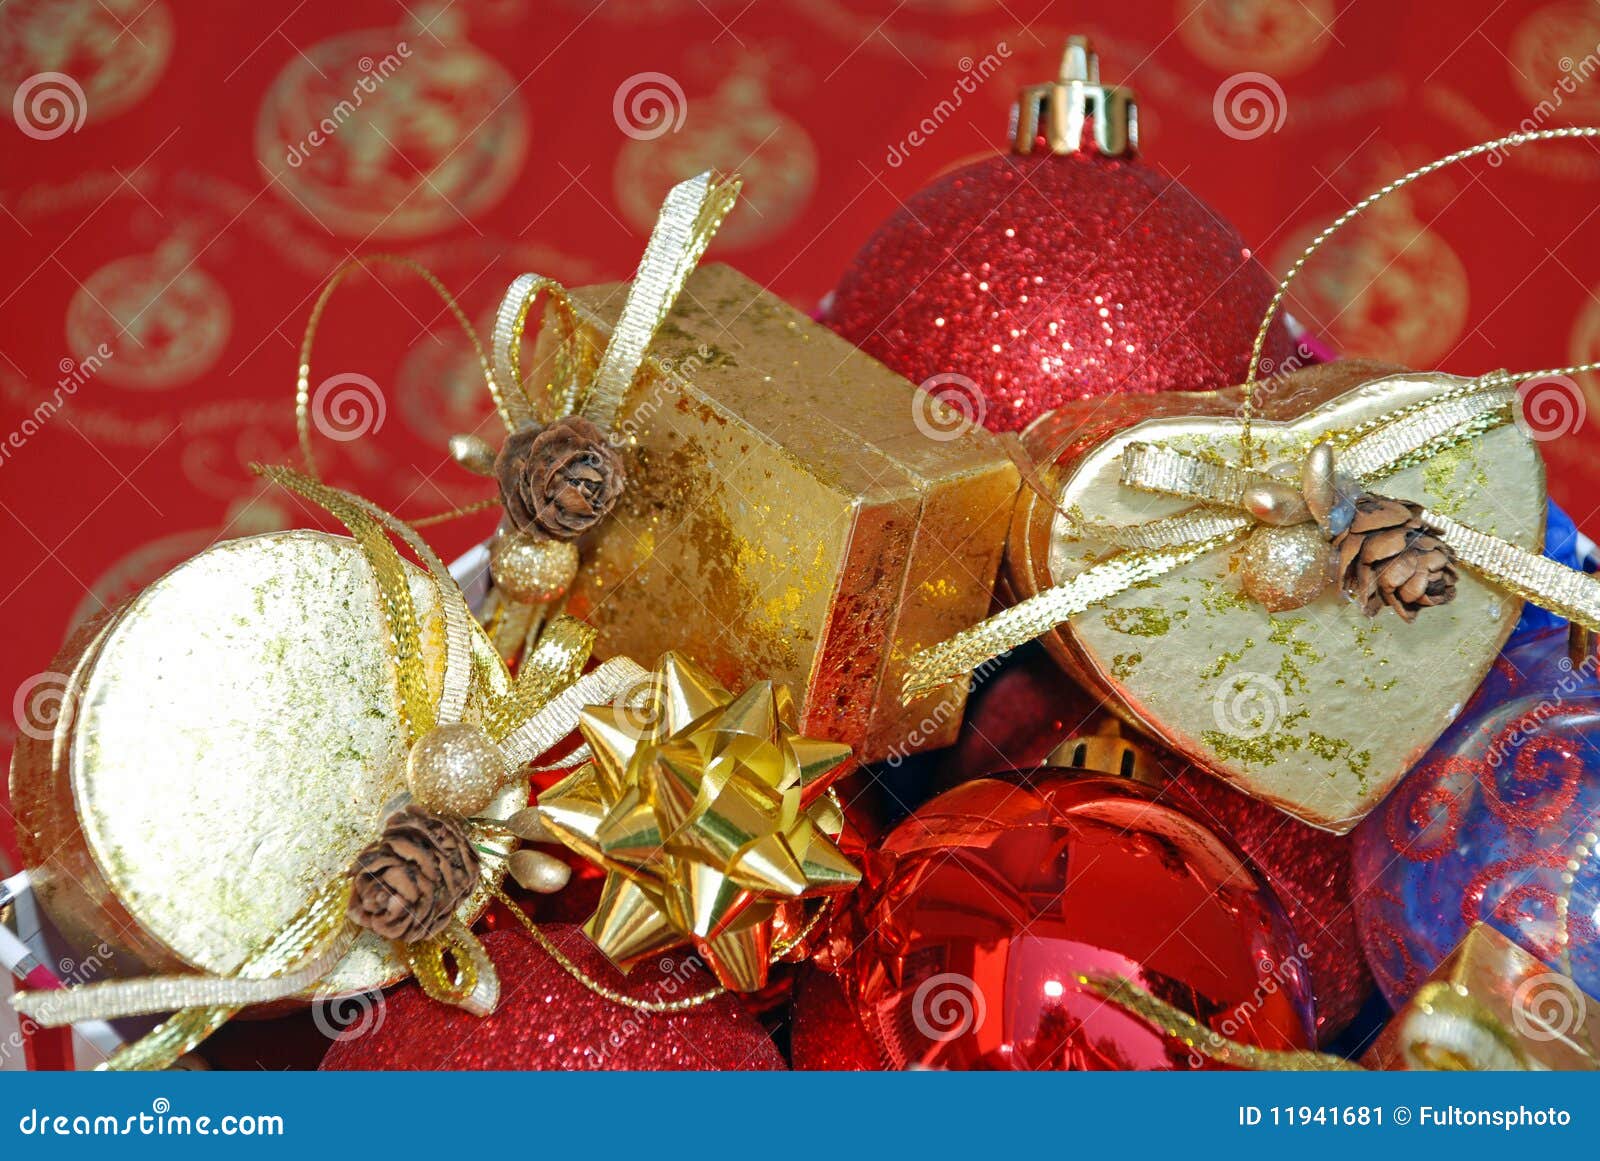 Christmas Theme Decorations Stock Image - Image of artistic, branch ...